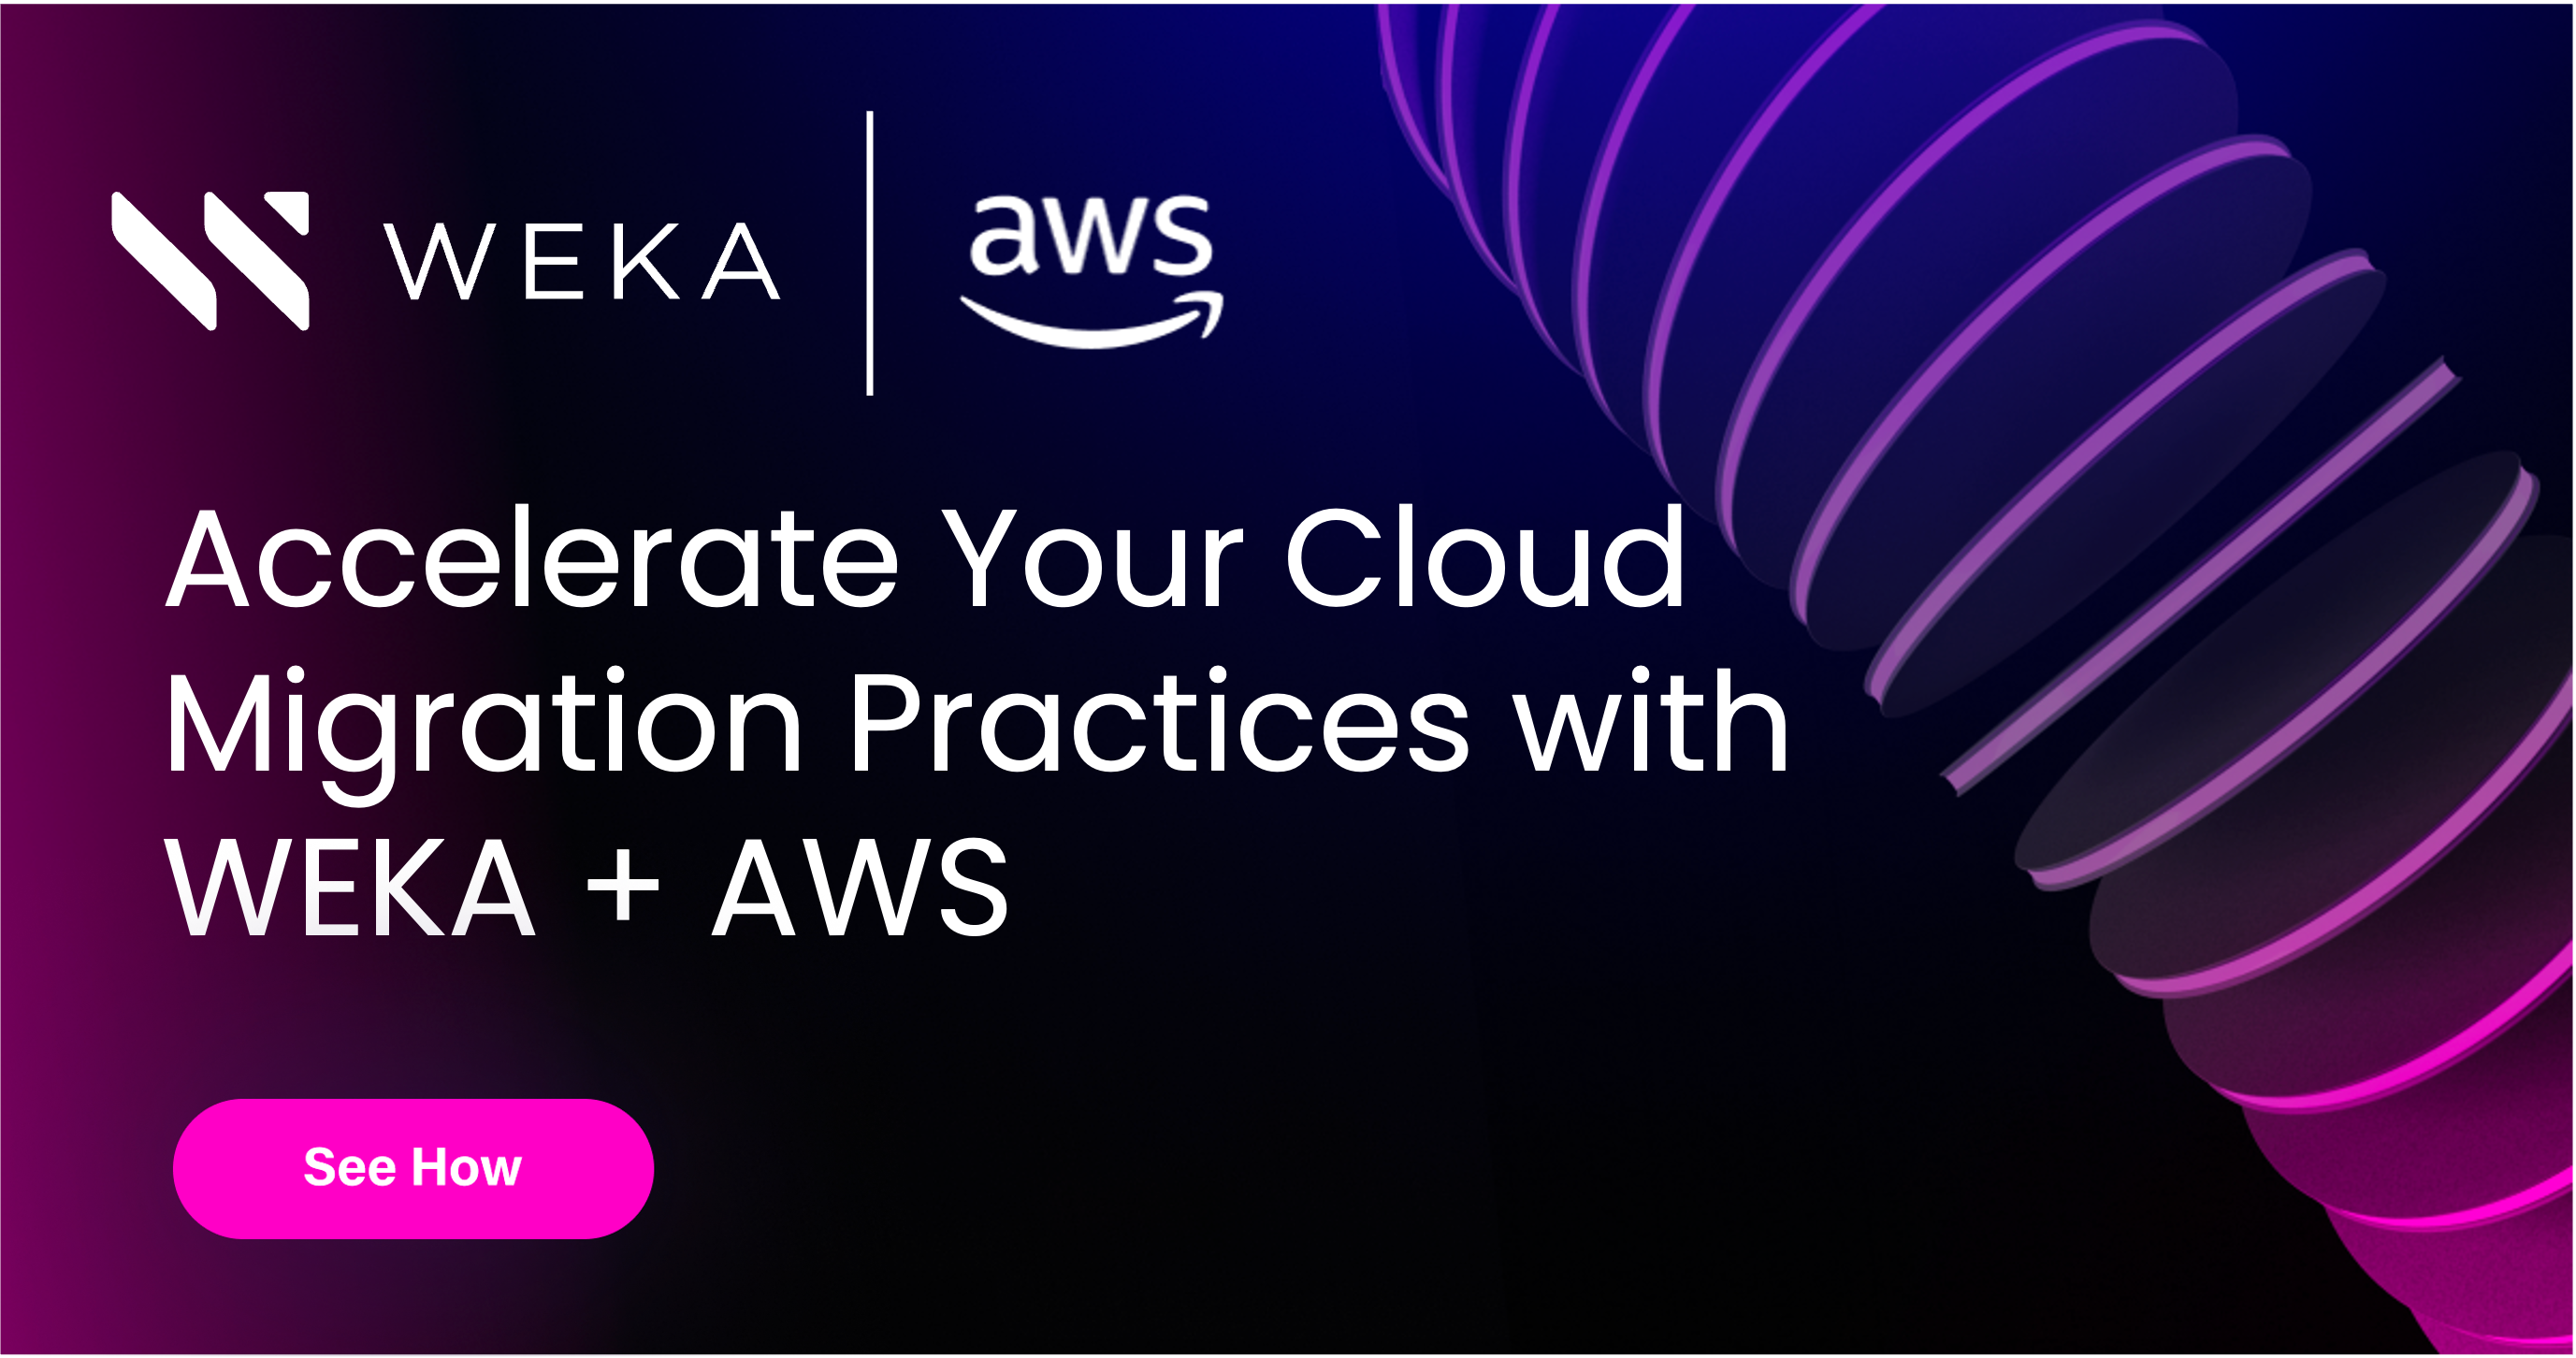 Partners: Accelerate your Cloud Migration Practices with WEKA and AWS